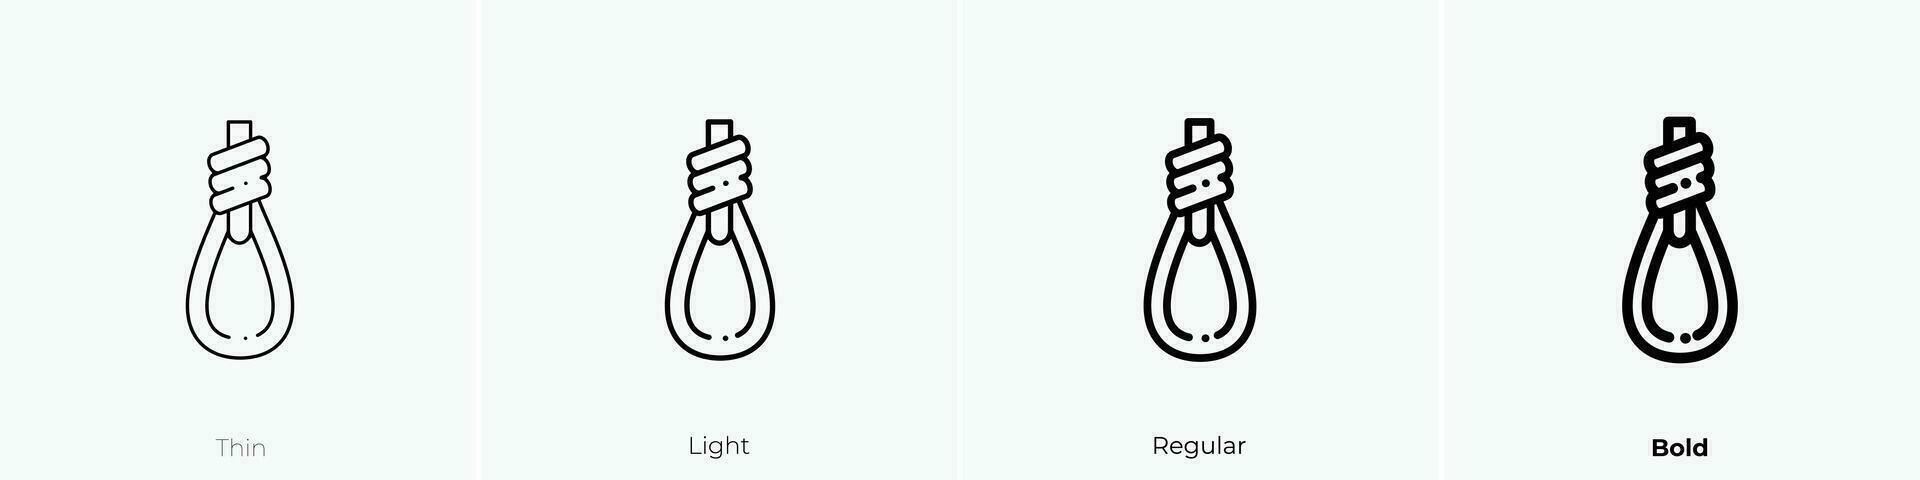 rope icon. Thin, Light, Regular And Bold style design isolated on white background vector